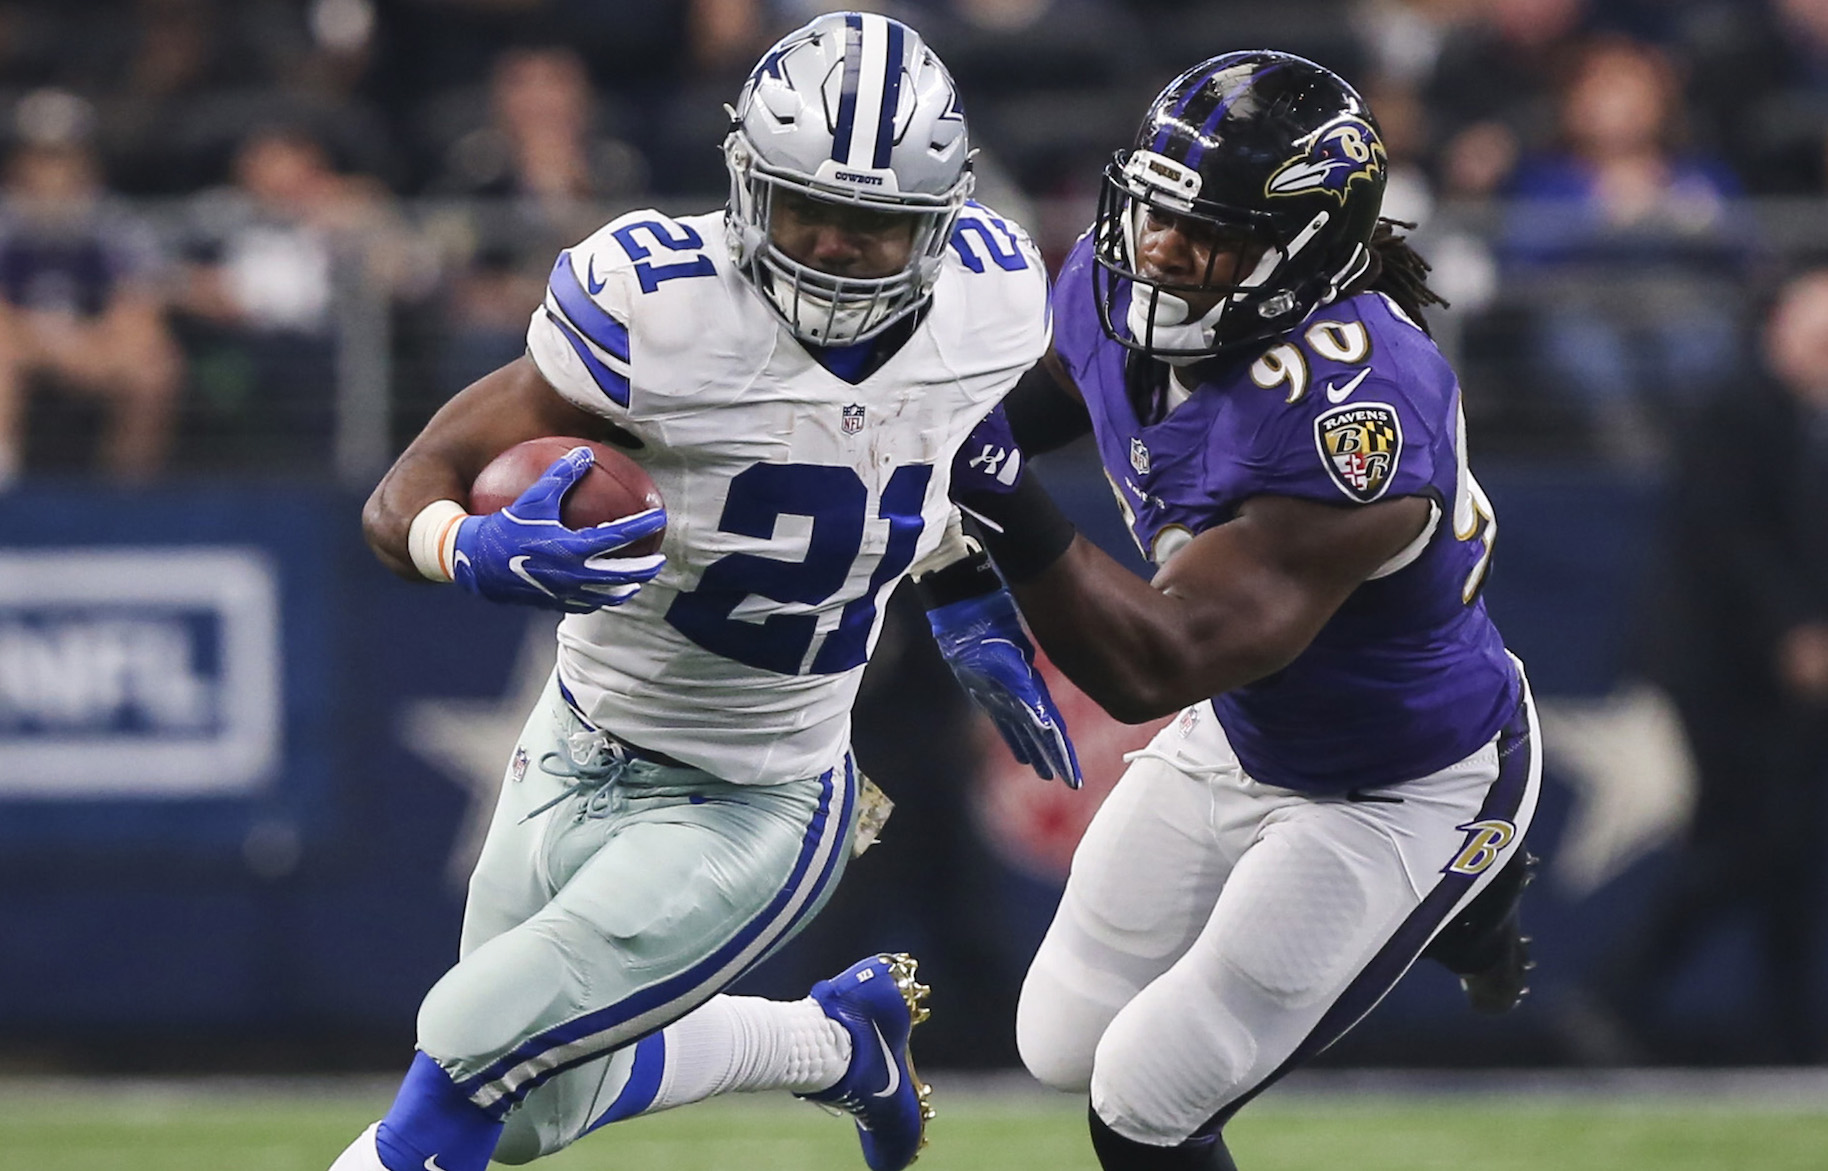 Why are the Dallas Cowboys and Baltimore Ravens playing on Tuesday night?